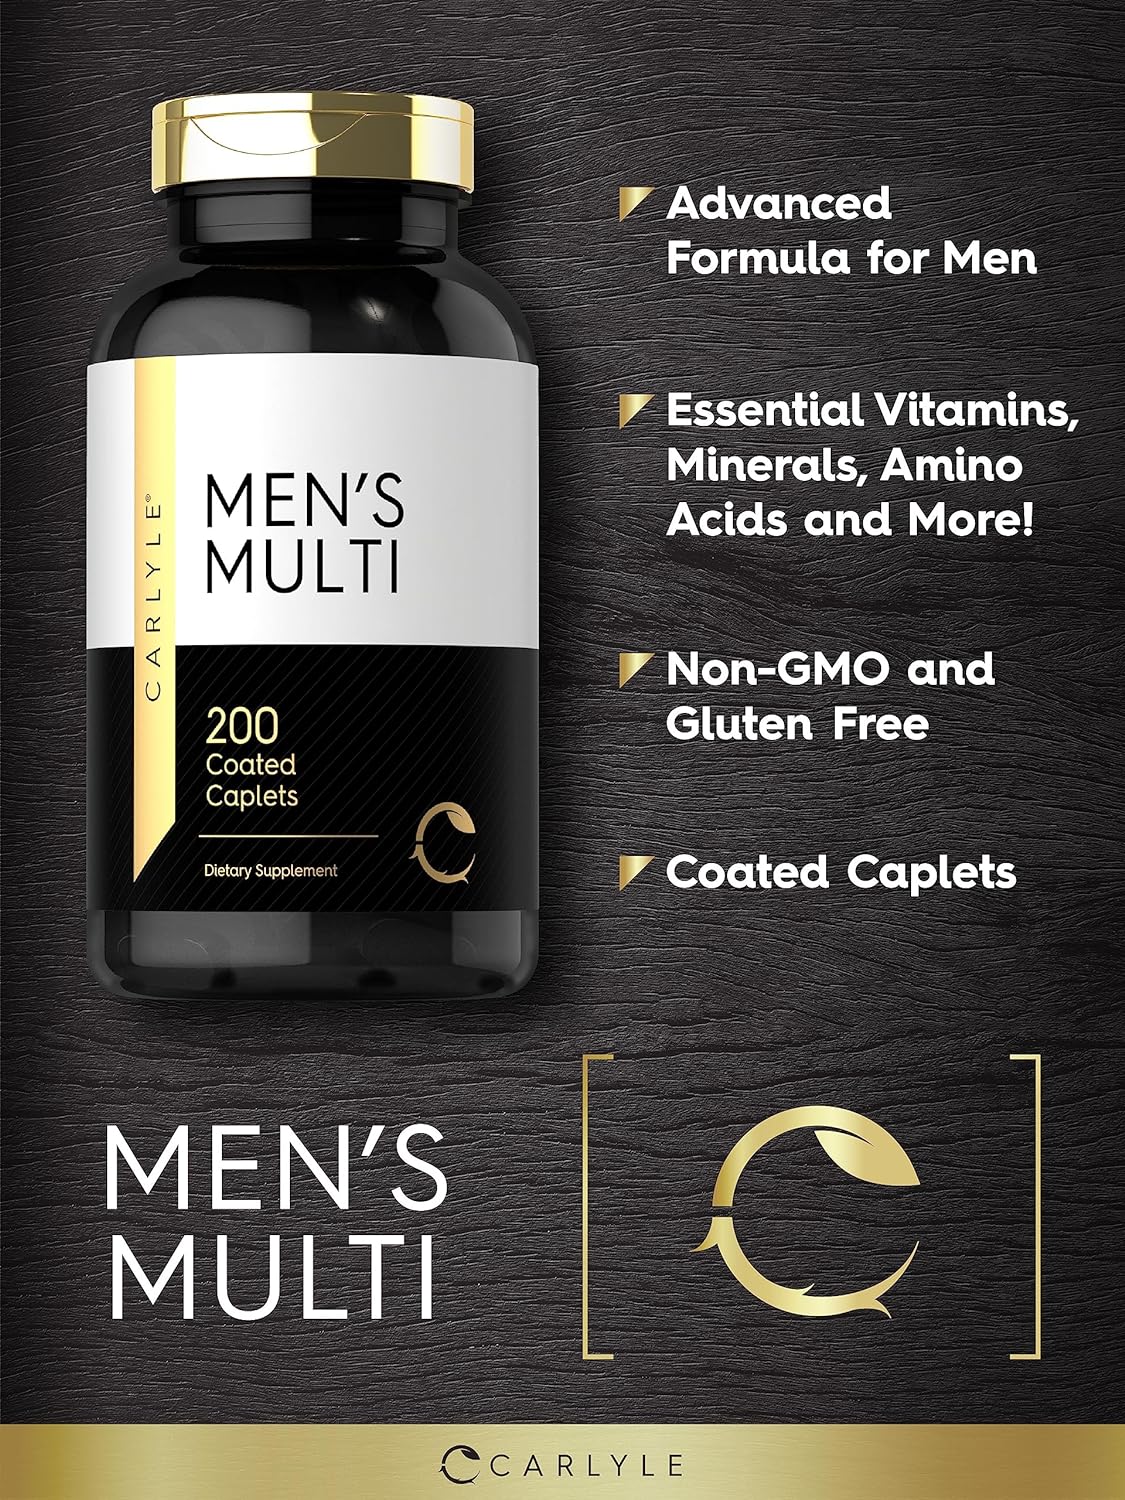 Multivitamin for Men | 200 Caplets | with Vitamins A, C, D, E,  B Vitamins | Non-GMO  Gluten Free Daily Supplement | by Horbaach